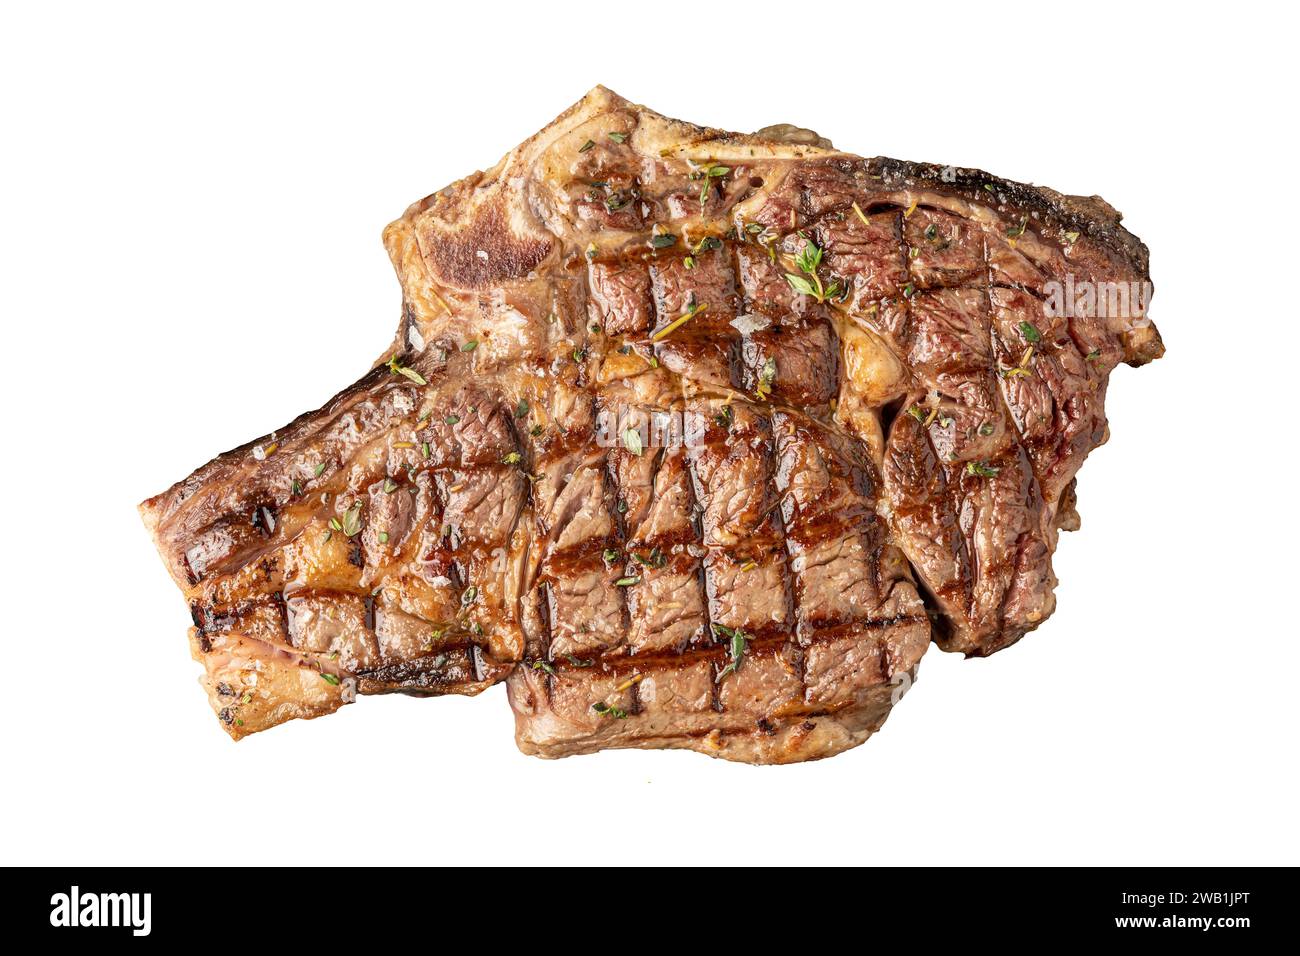 Top view of Grilled tomahawk steak on white background Stock Photo